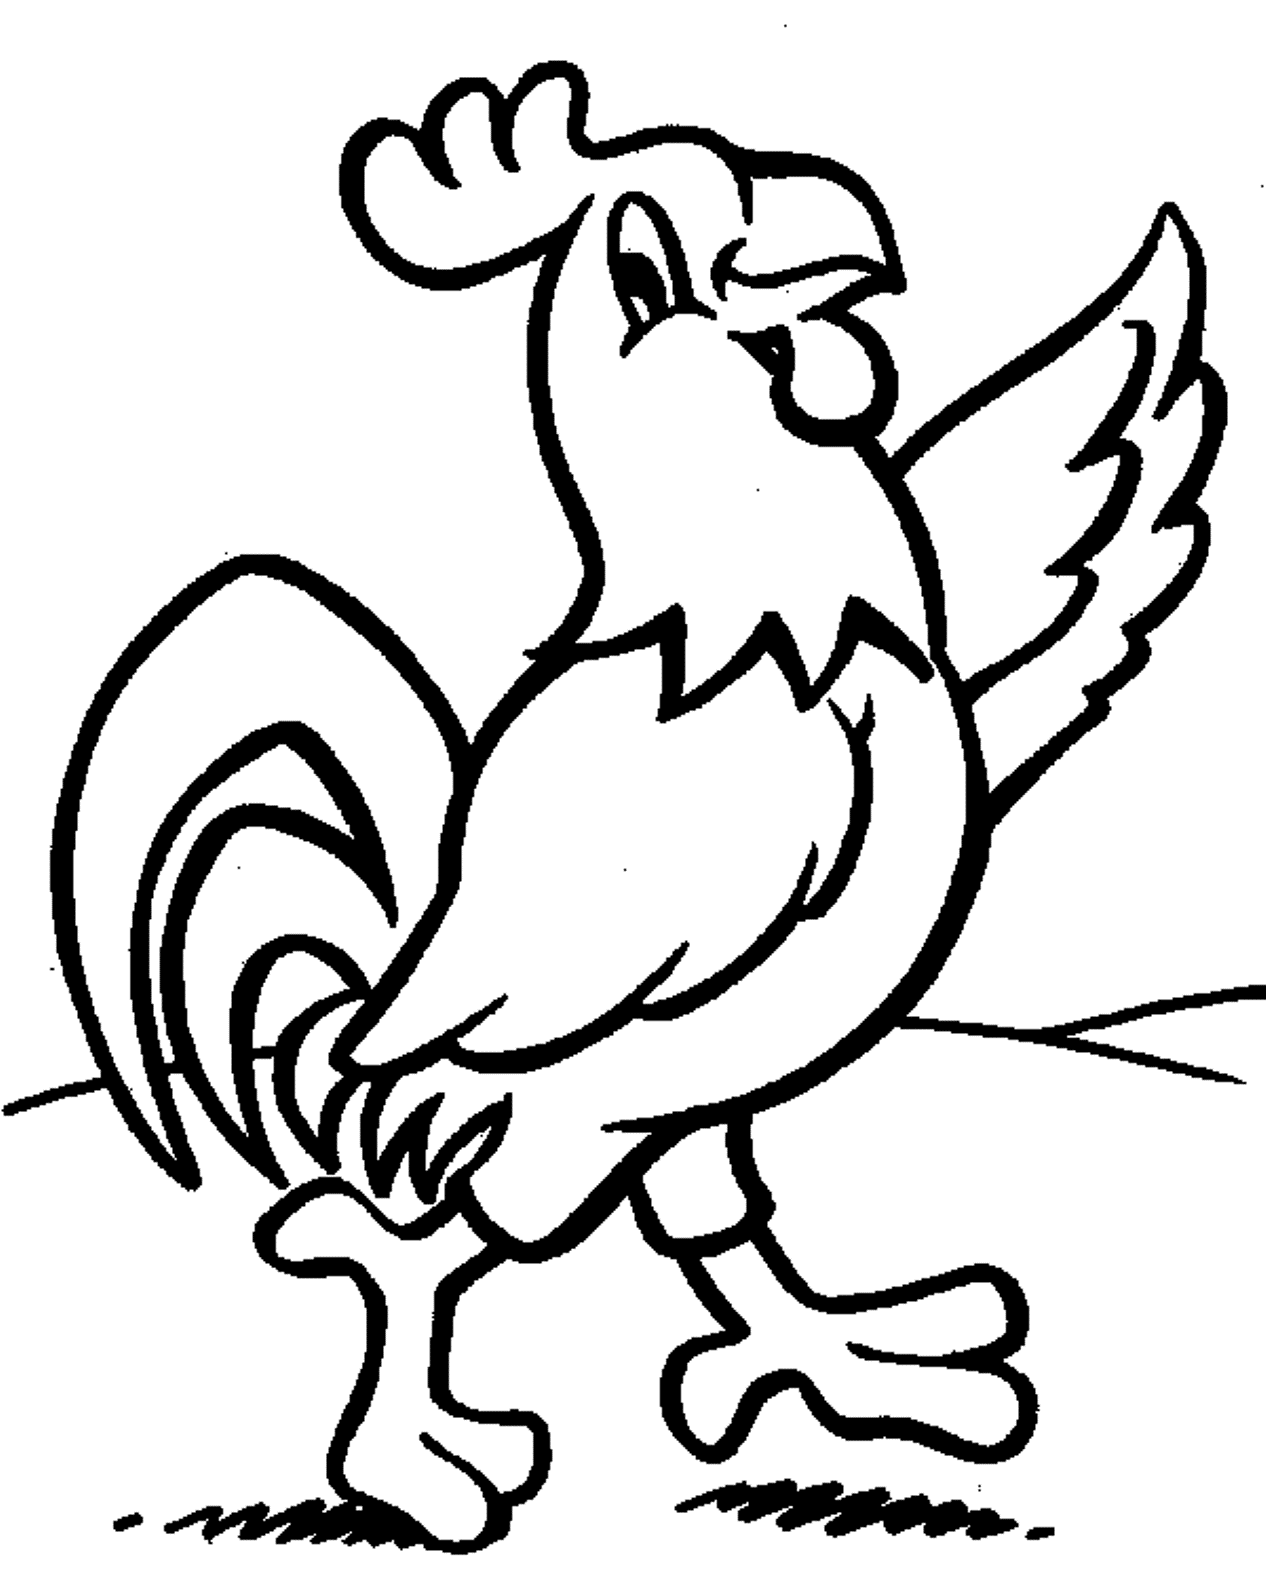 Rooster Farm Animal S For Kids60b8 Coloring Page